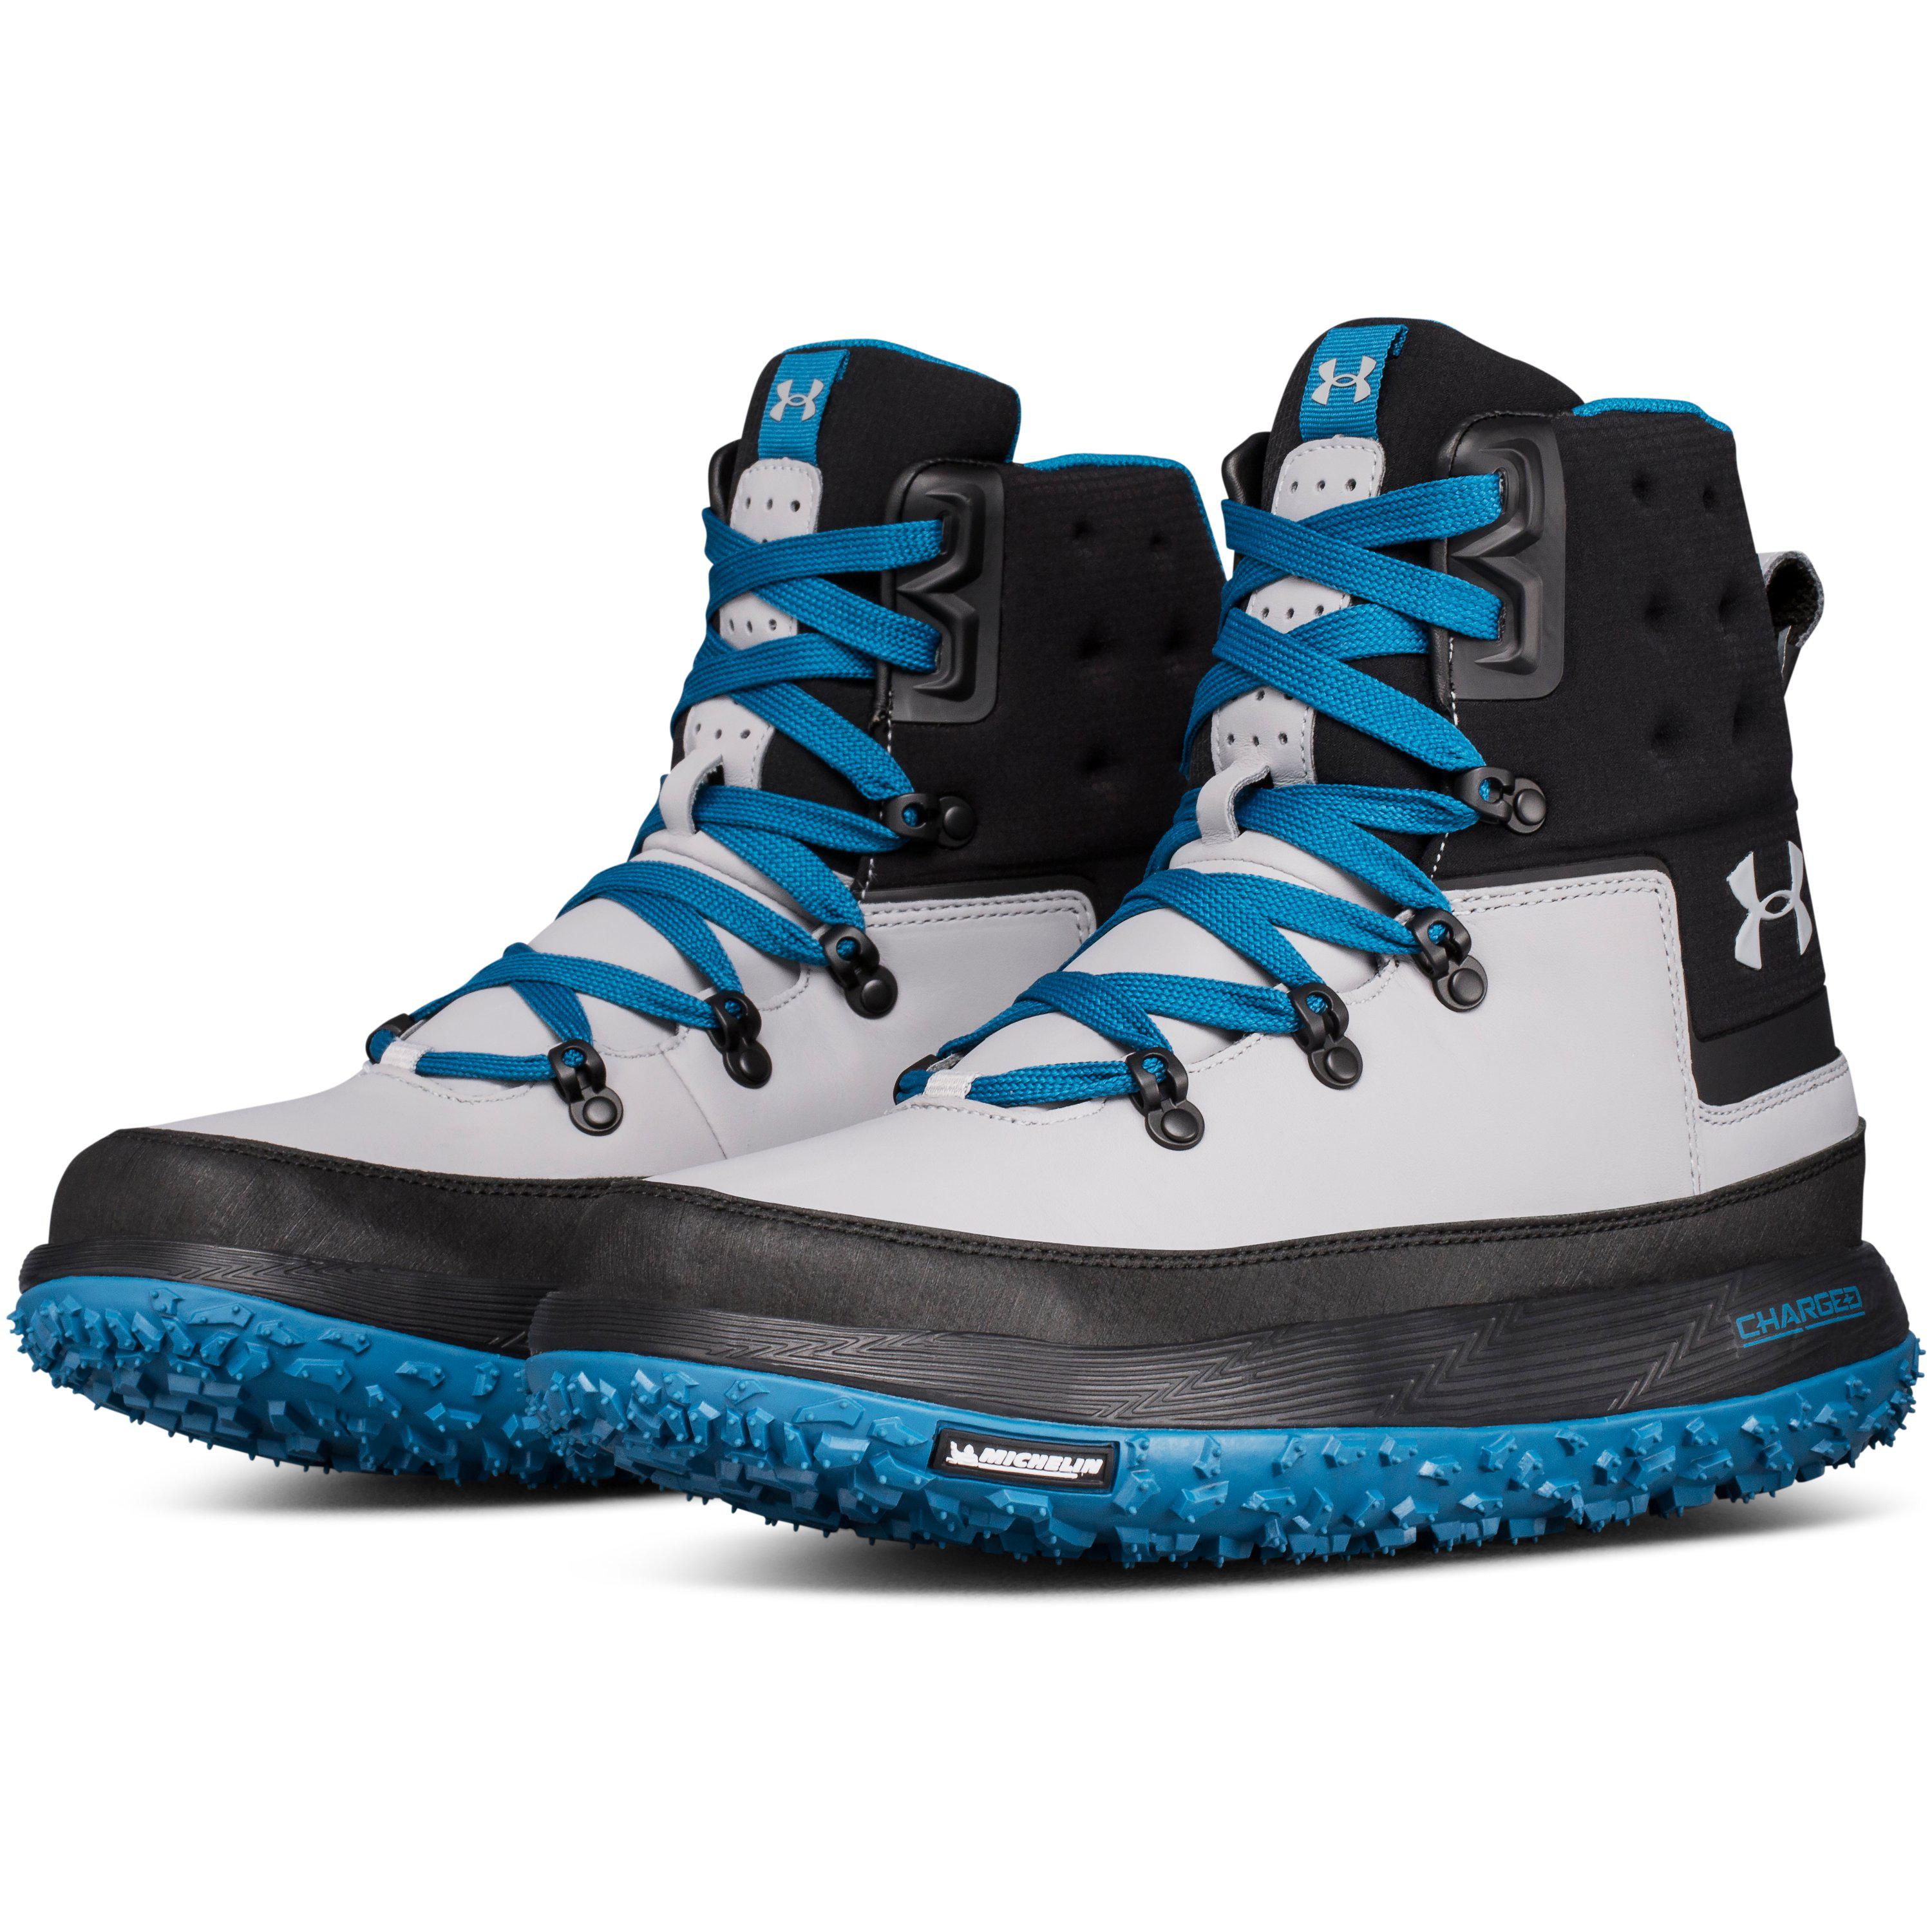 Under Armour Leather Men's Ua Fat Tire Govie Hiking Boots in Blue for ...